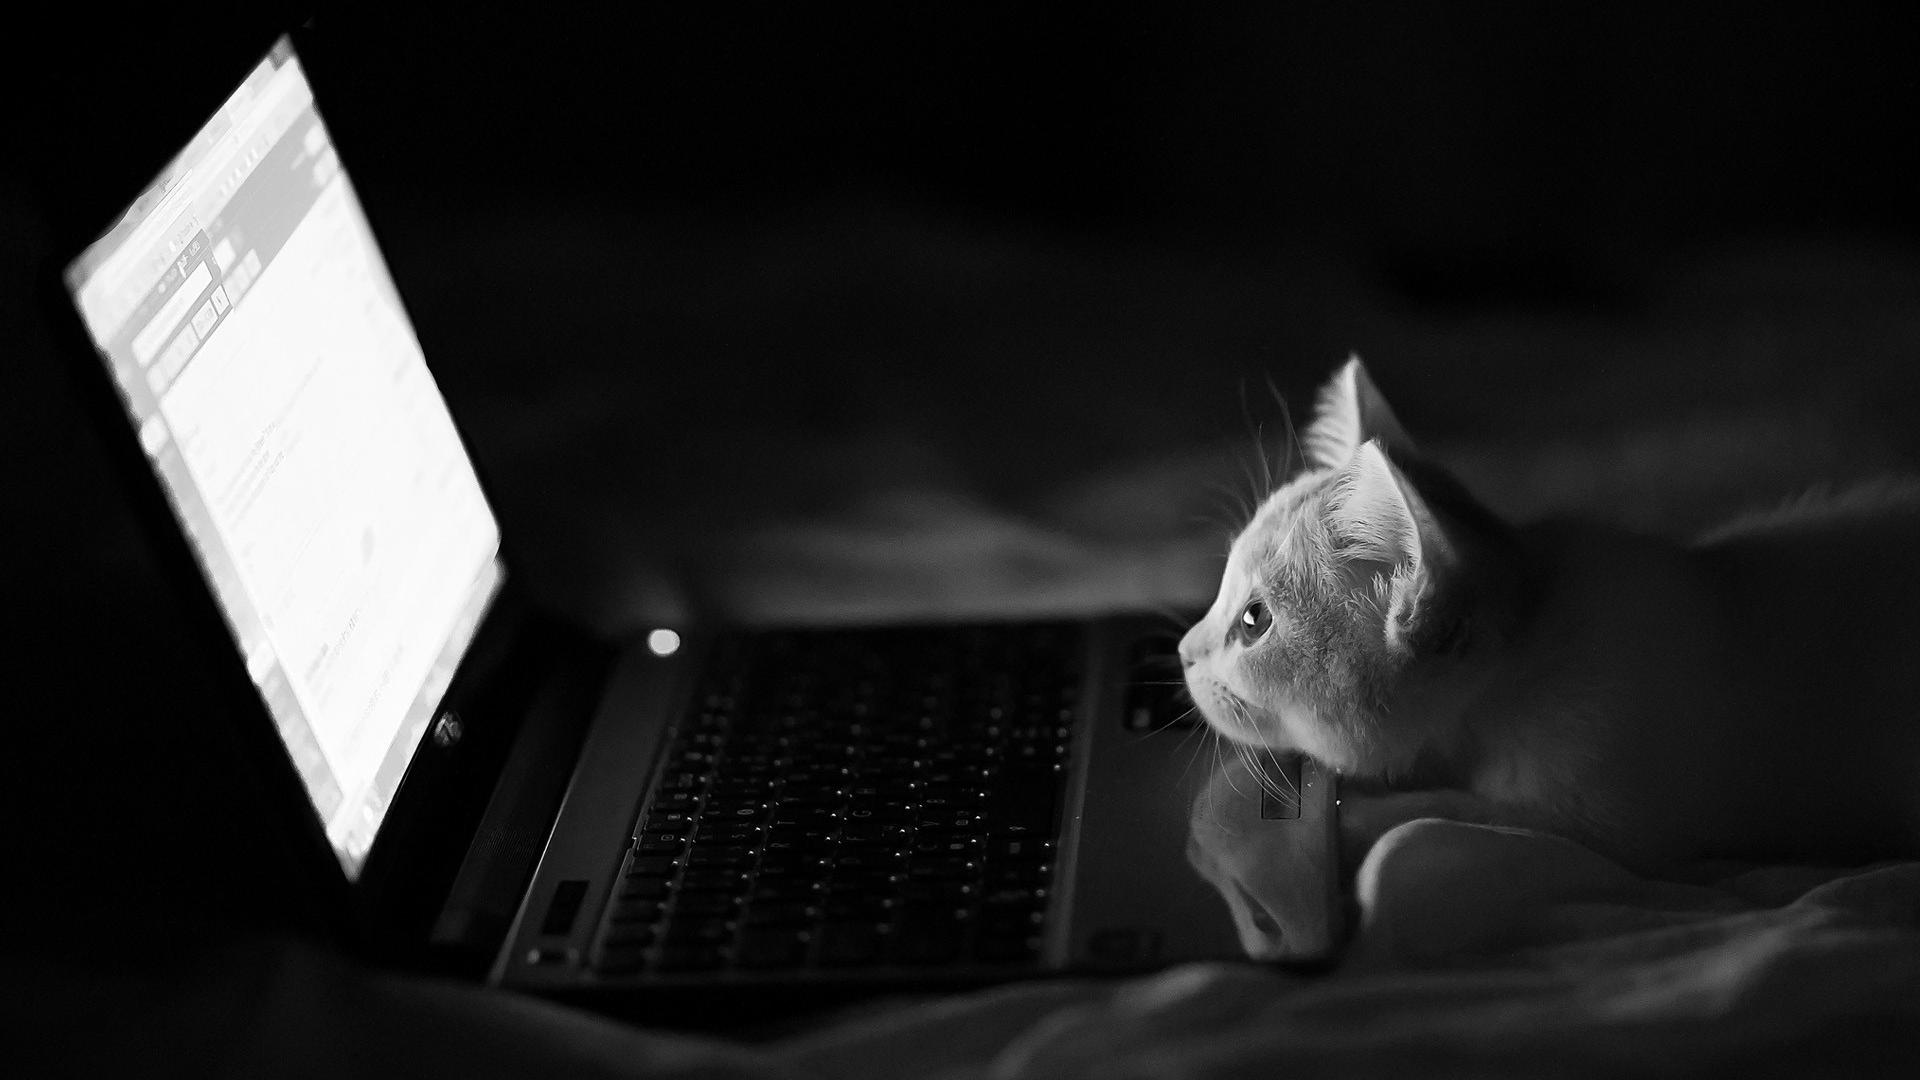 White cats funny laptops kittens gmail animals wallpaper 15895